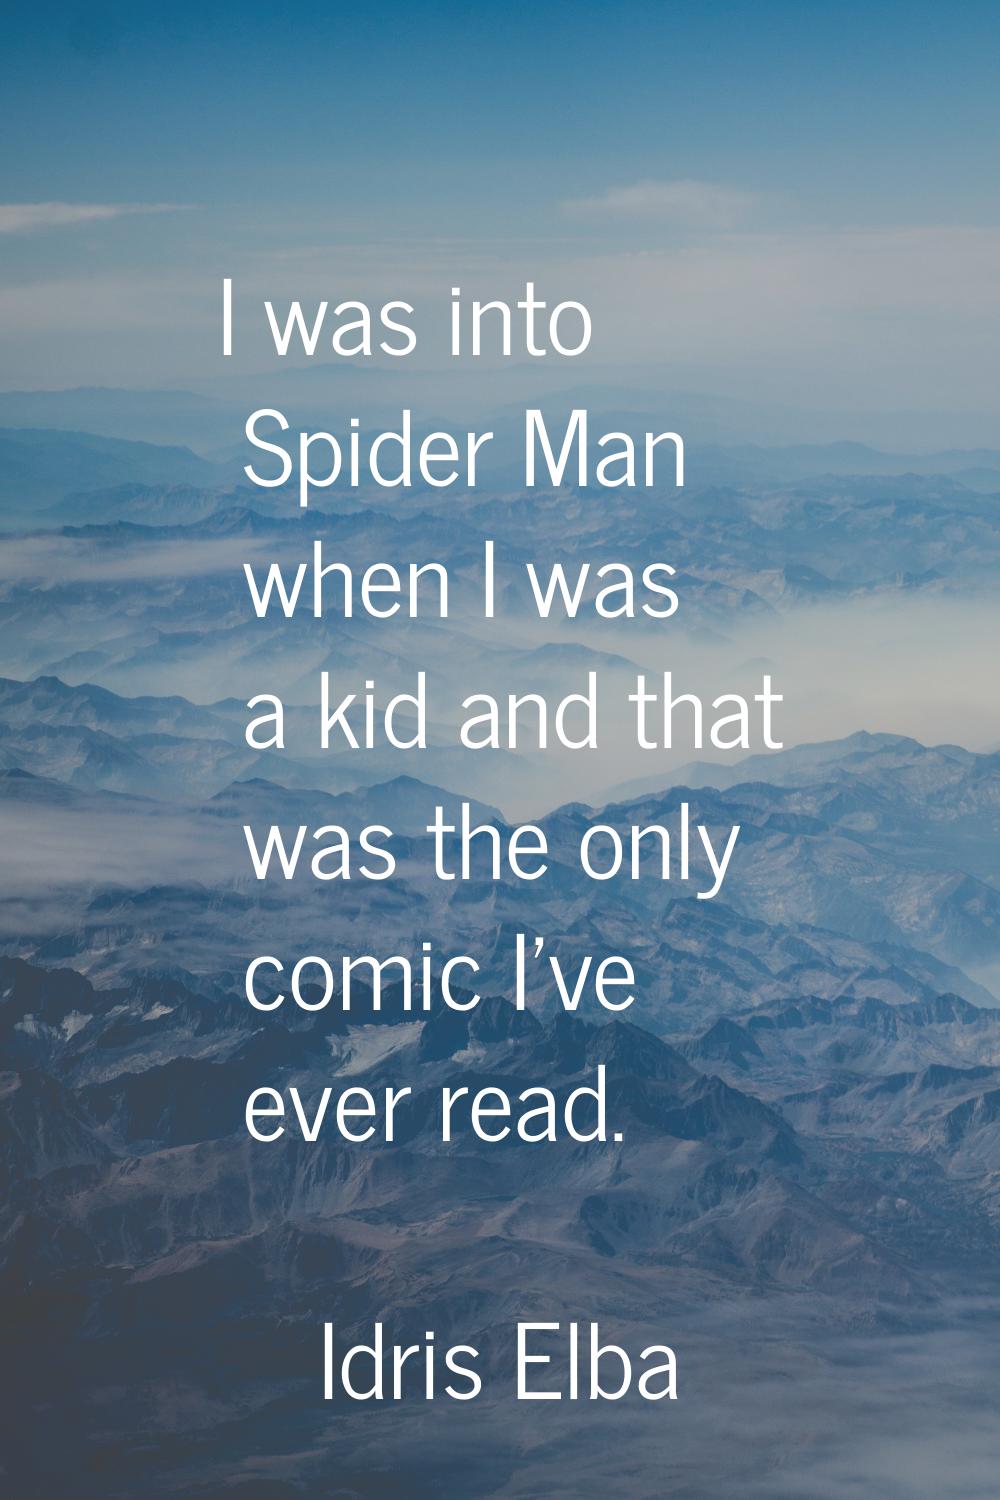 I was into Spider Man when I was a kid and that was the only comic I've ever read.